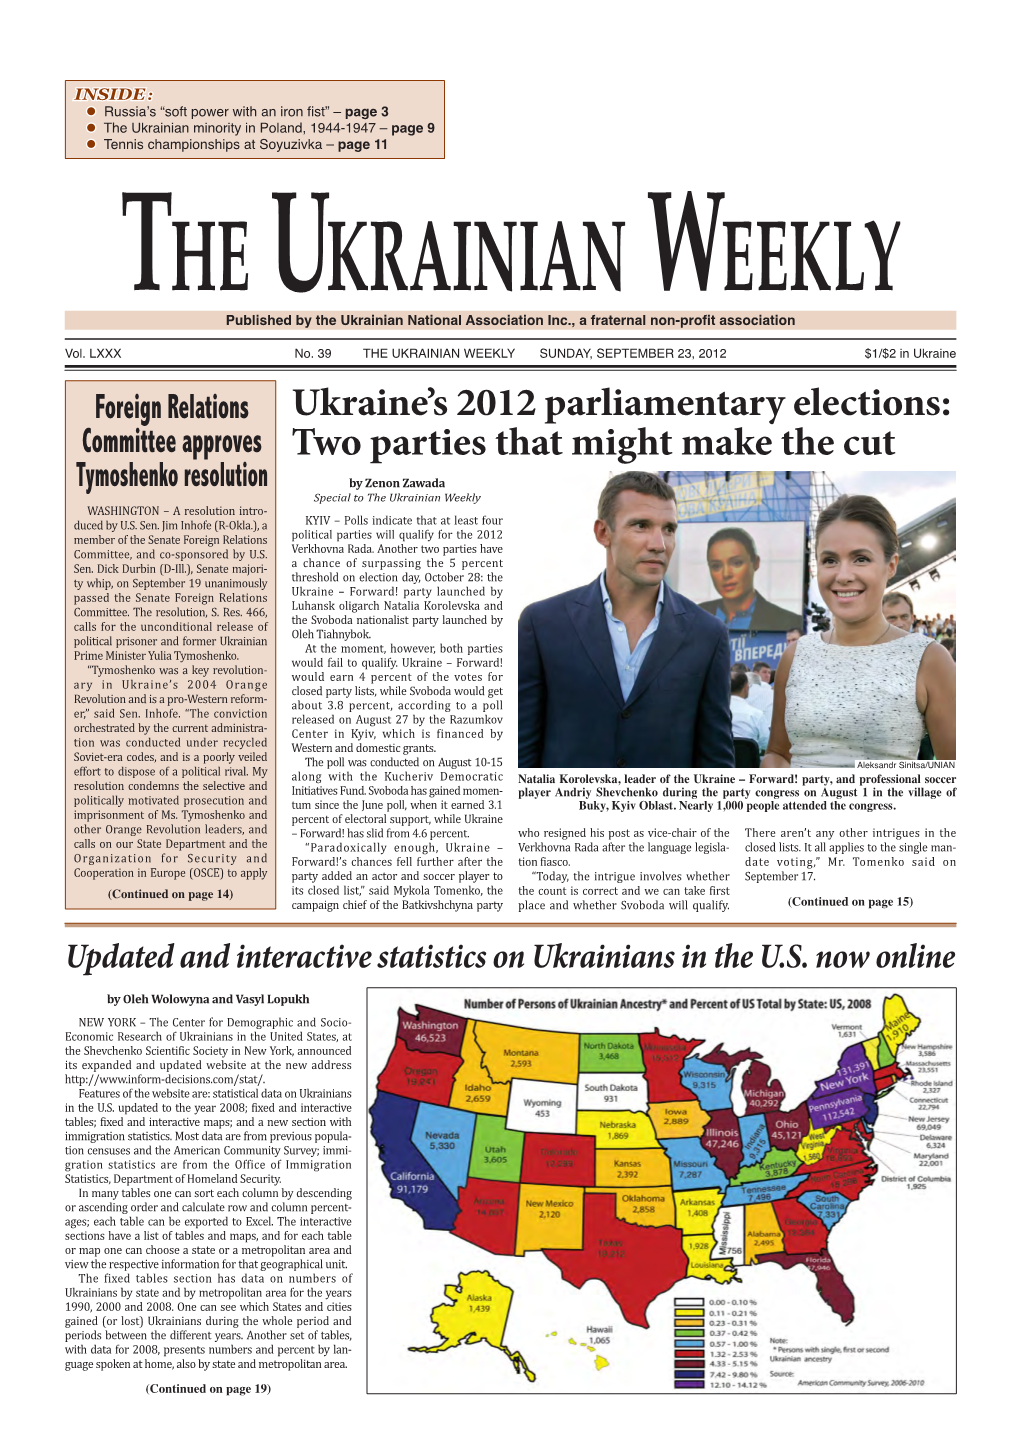 Ukraine's 2012 Parliamentary Elections: Two Parties That Might